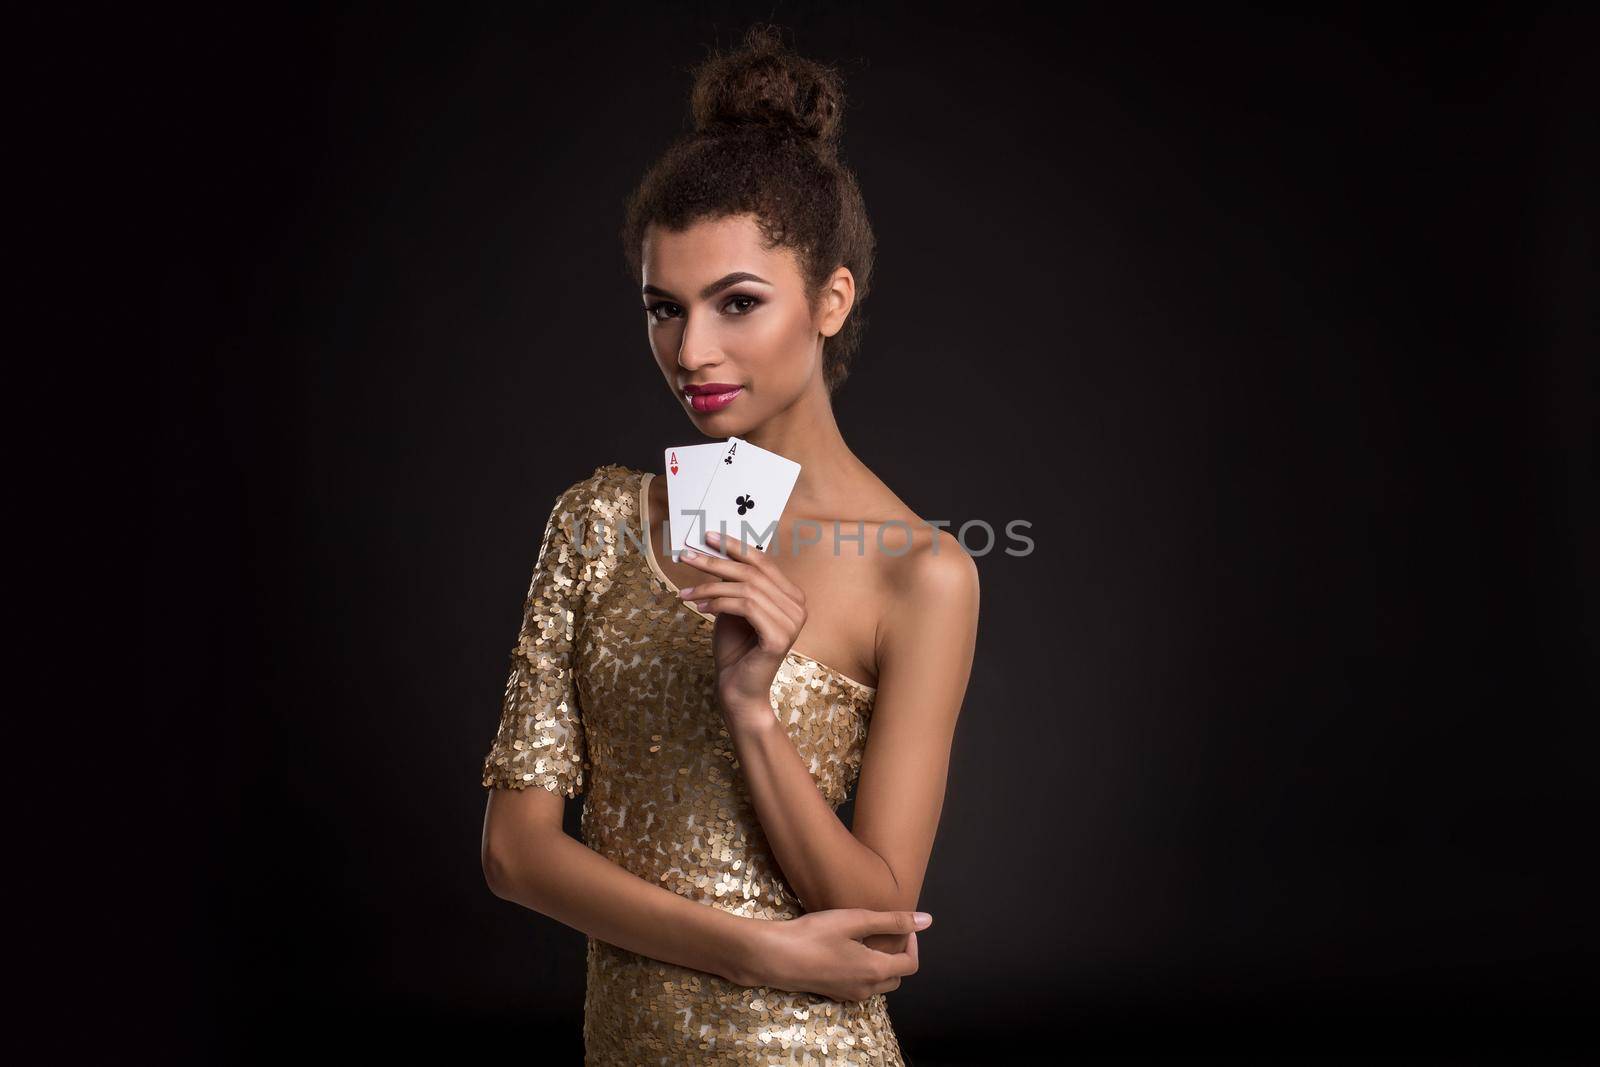 Woman winning - Young woman in a classy gold dress holding two aces, a poker of aces card combination. by nazarovsergey